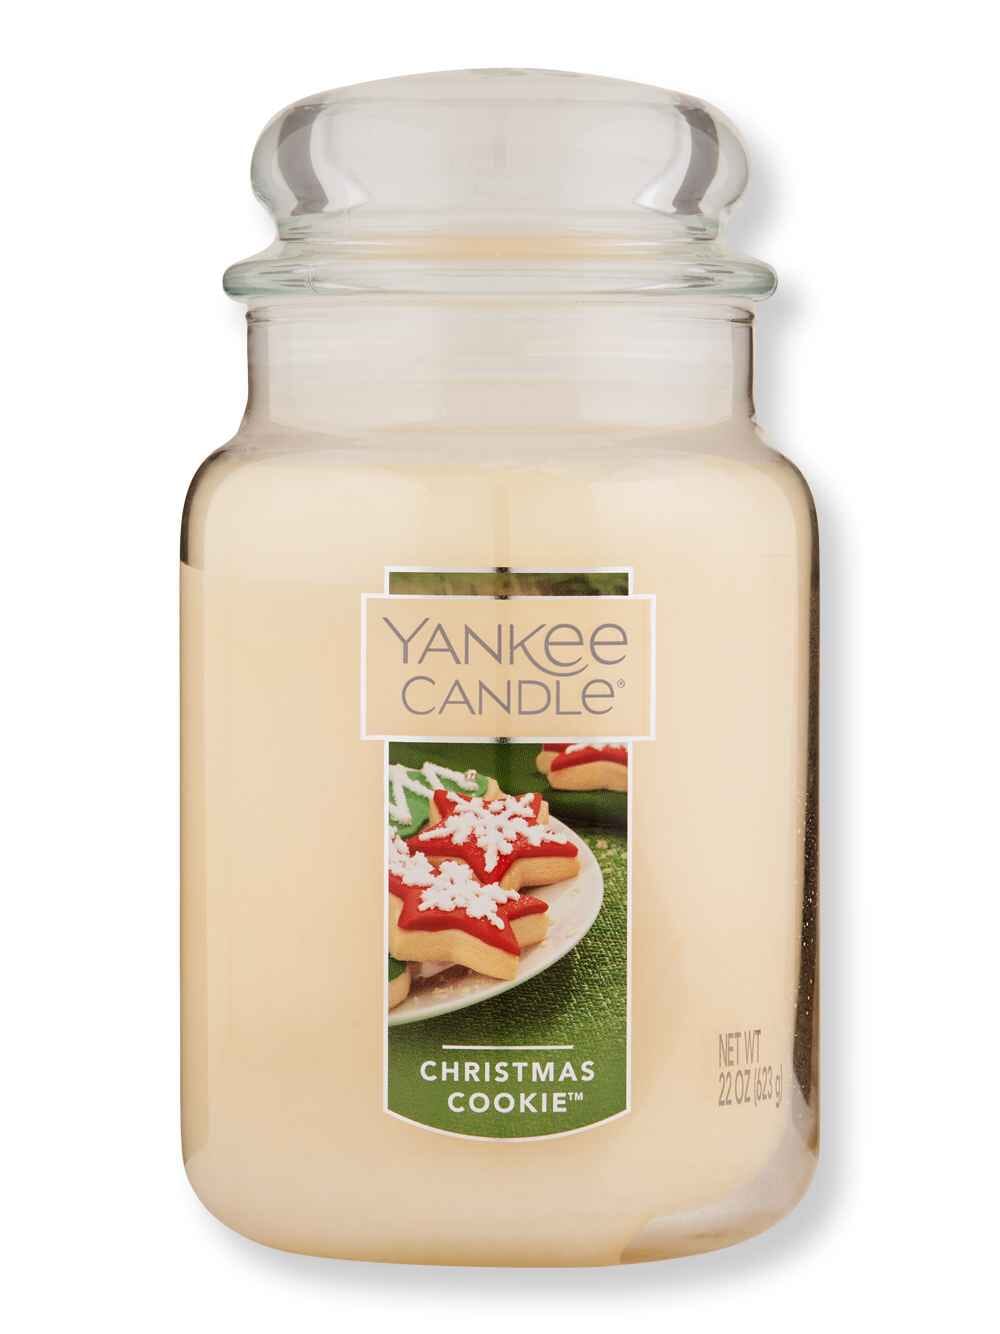 Yankee Candle Yankee Candle Christmas Cookie Original Large Jar Candle 22 oz Candles & Diffusers 